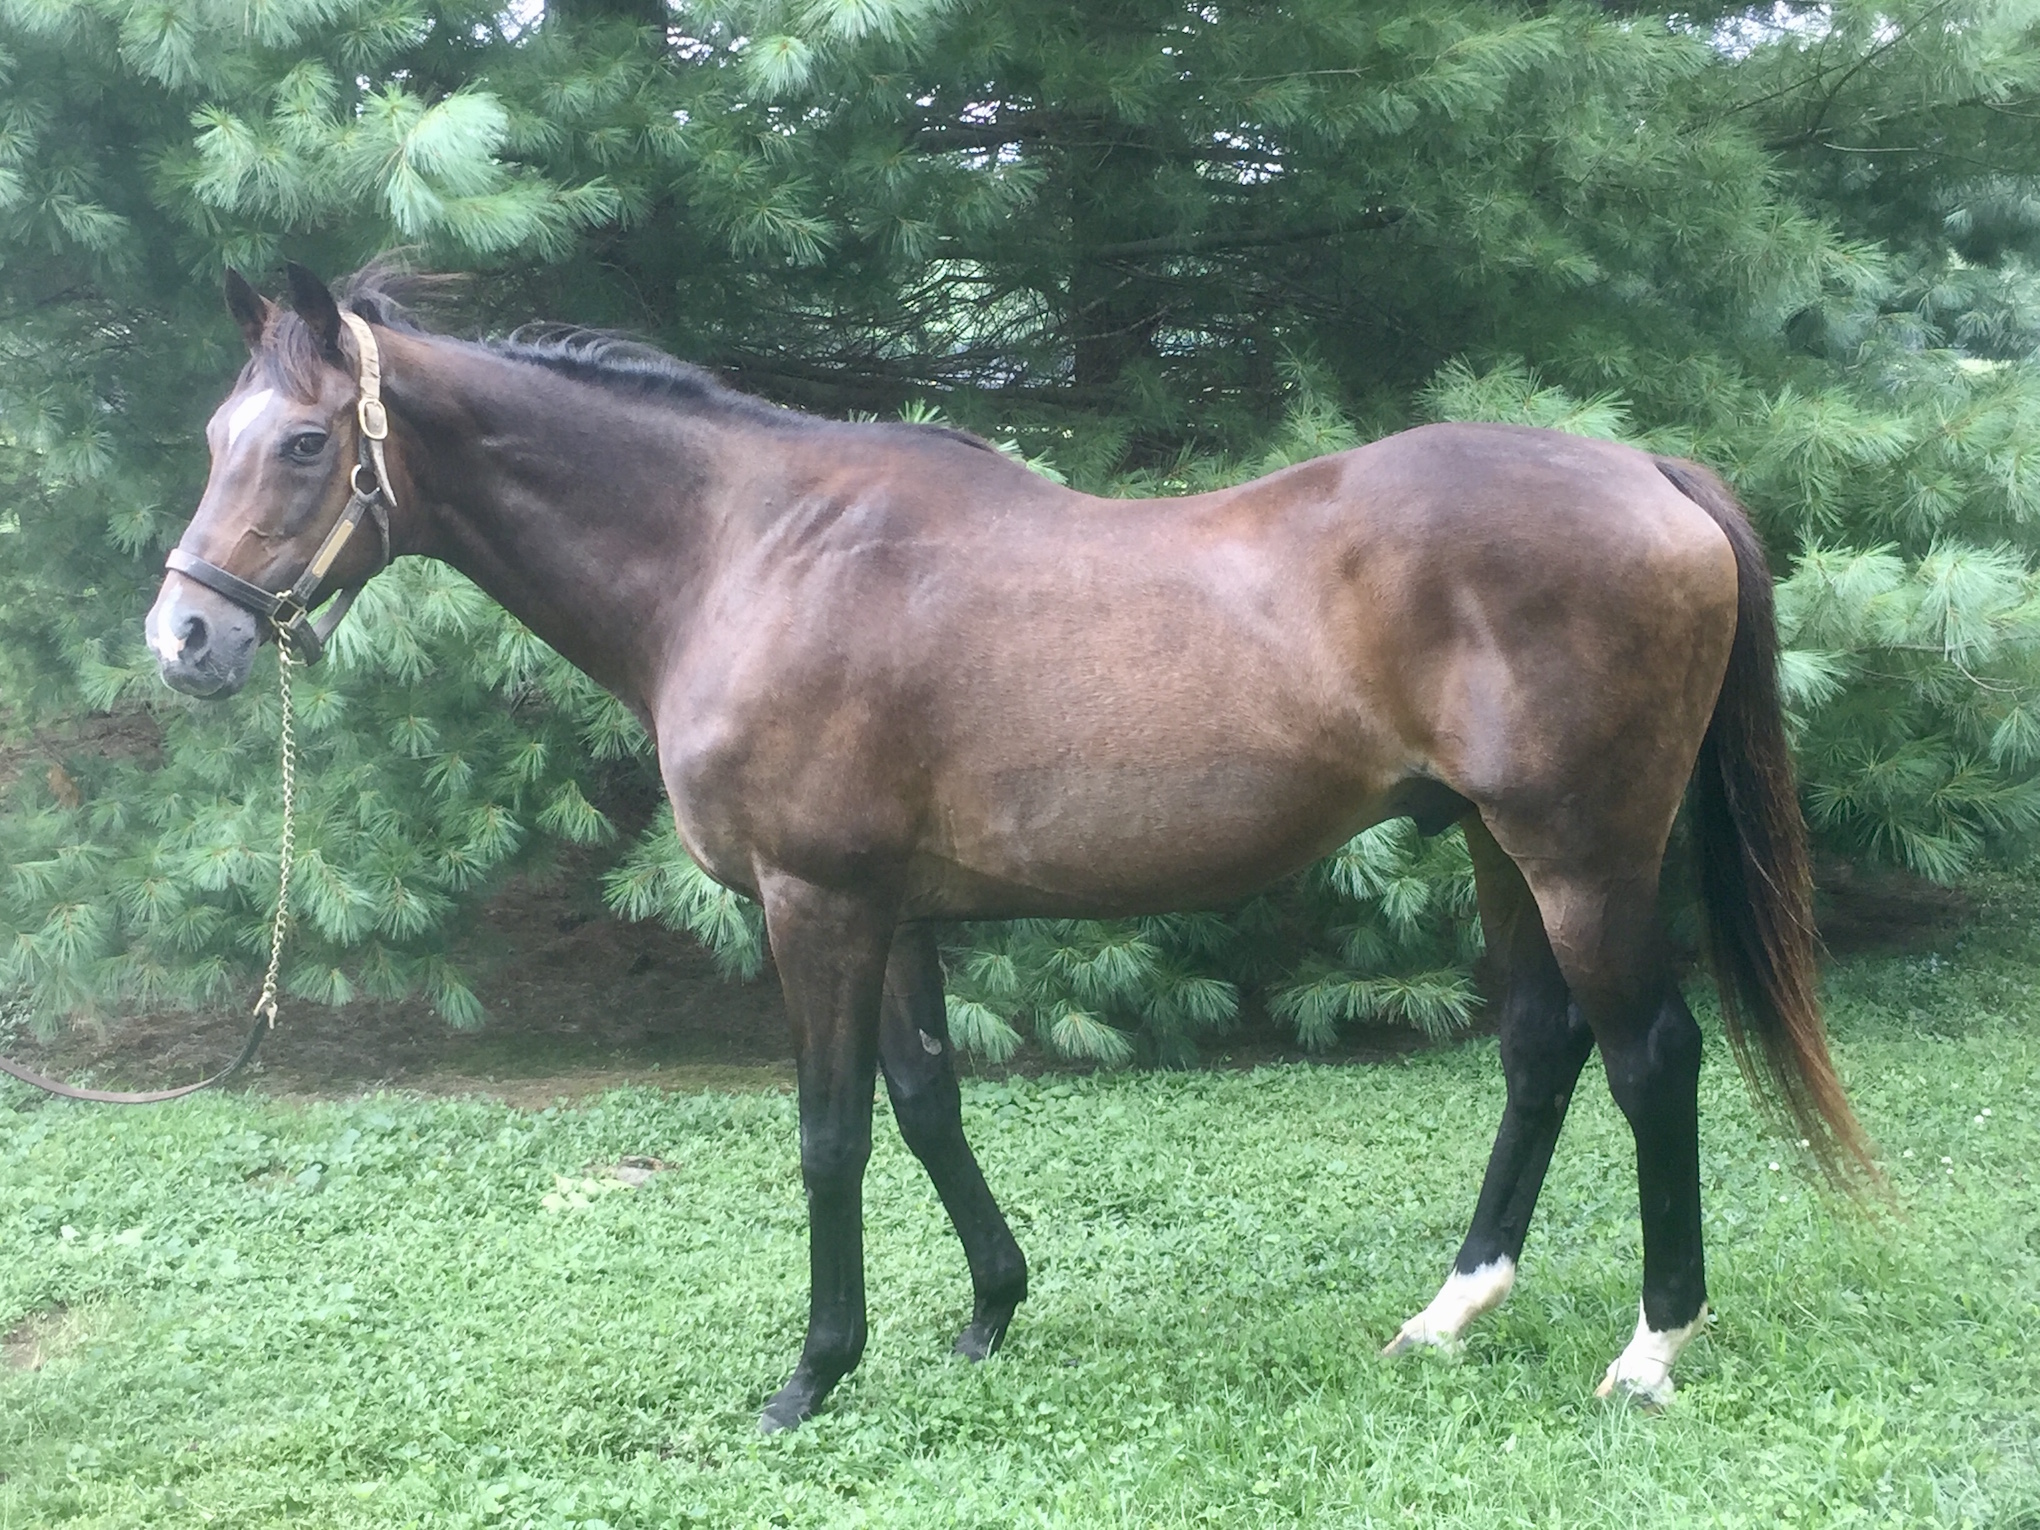 Swain pictured earlier this year at Shadwell Farm in Lexington, where he is spending his retirement. He is the only horse to win the King George VI and Queen Elizabeth Stakes twice (the other was Dahlia in 1973/4). Photo: Shadwell